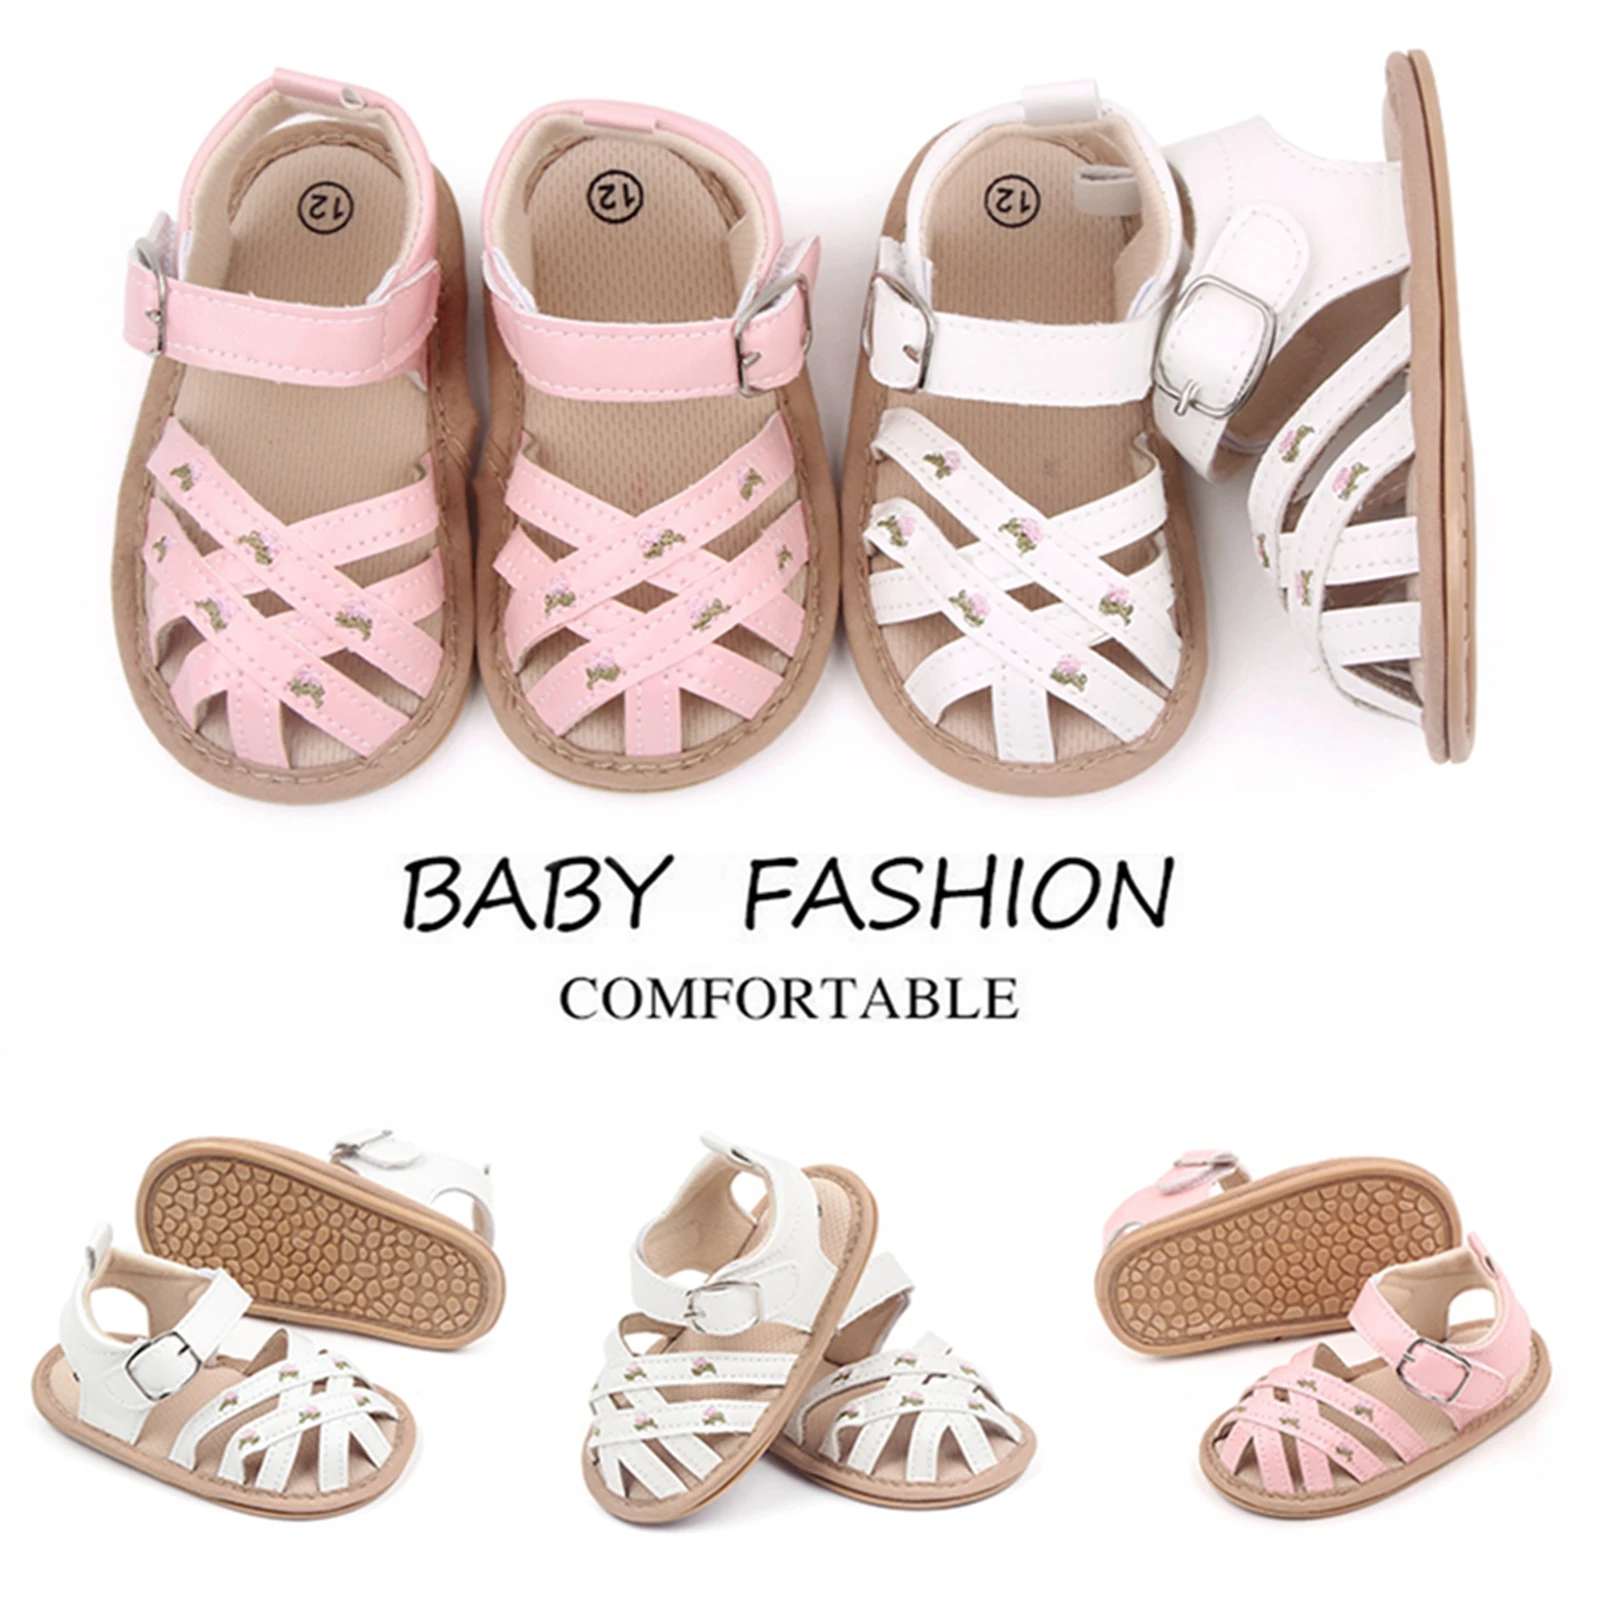 

0-18M Toddler Infant Baby Girls Cute Shoes Summer Sandals Closed-Toe Floral Embroidery Flats Newborn First Walkers Crib Shoes